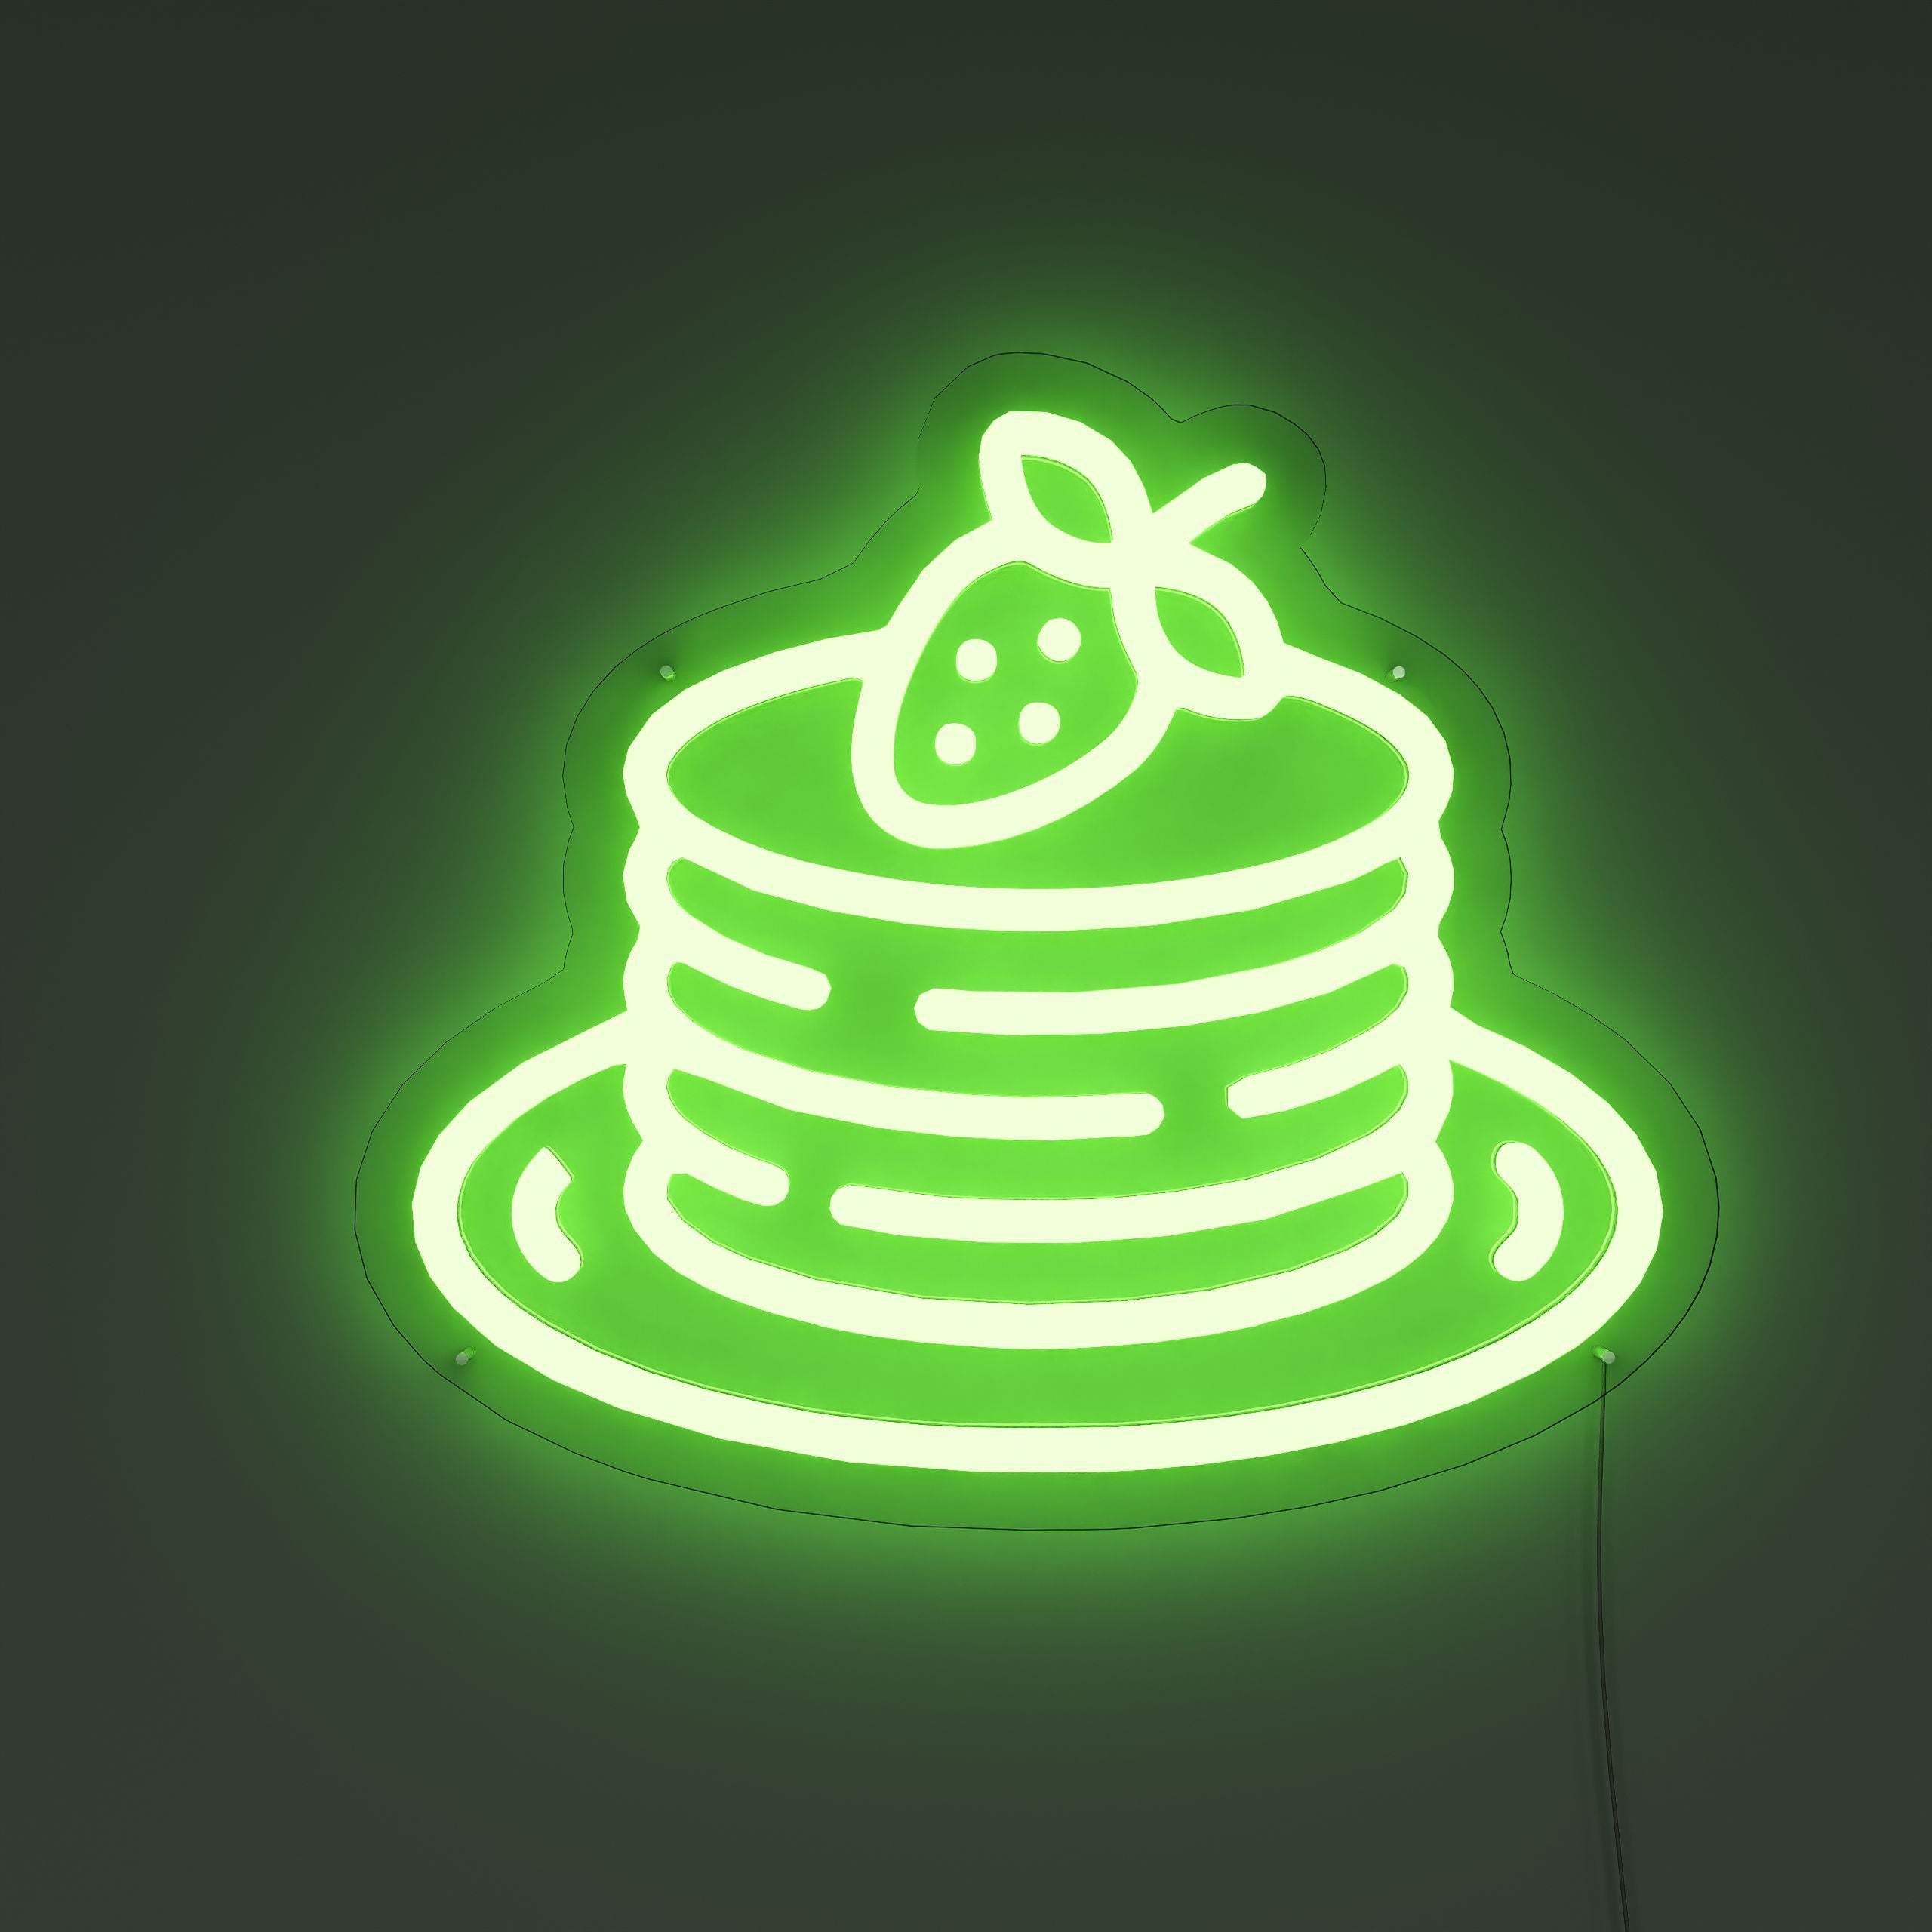 Flavorful-Cake-Assortment-Neon-Sign-Lite